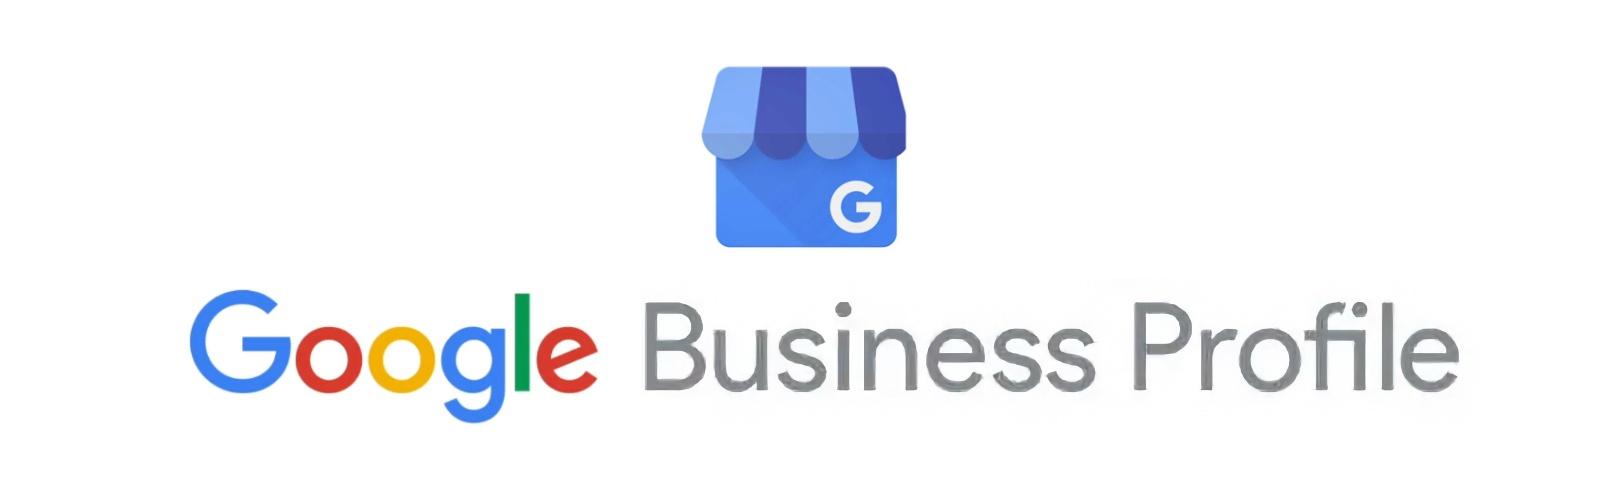 Google Business Profile Set Up And Optimization With Geoffresh Websites